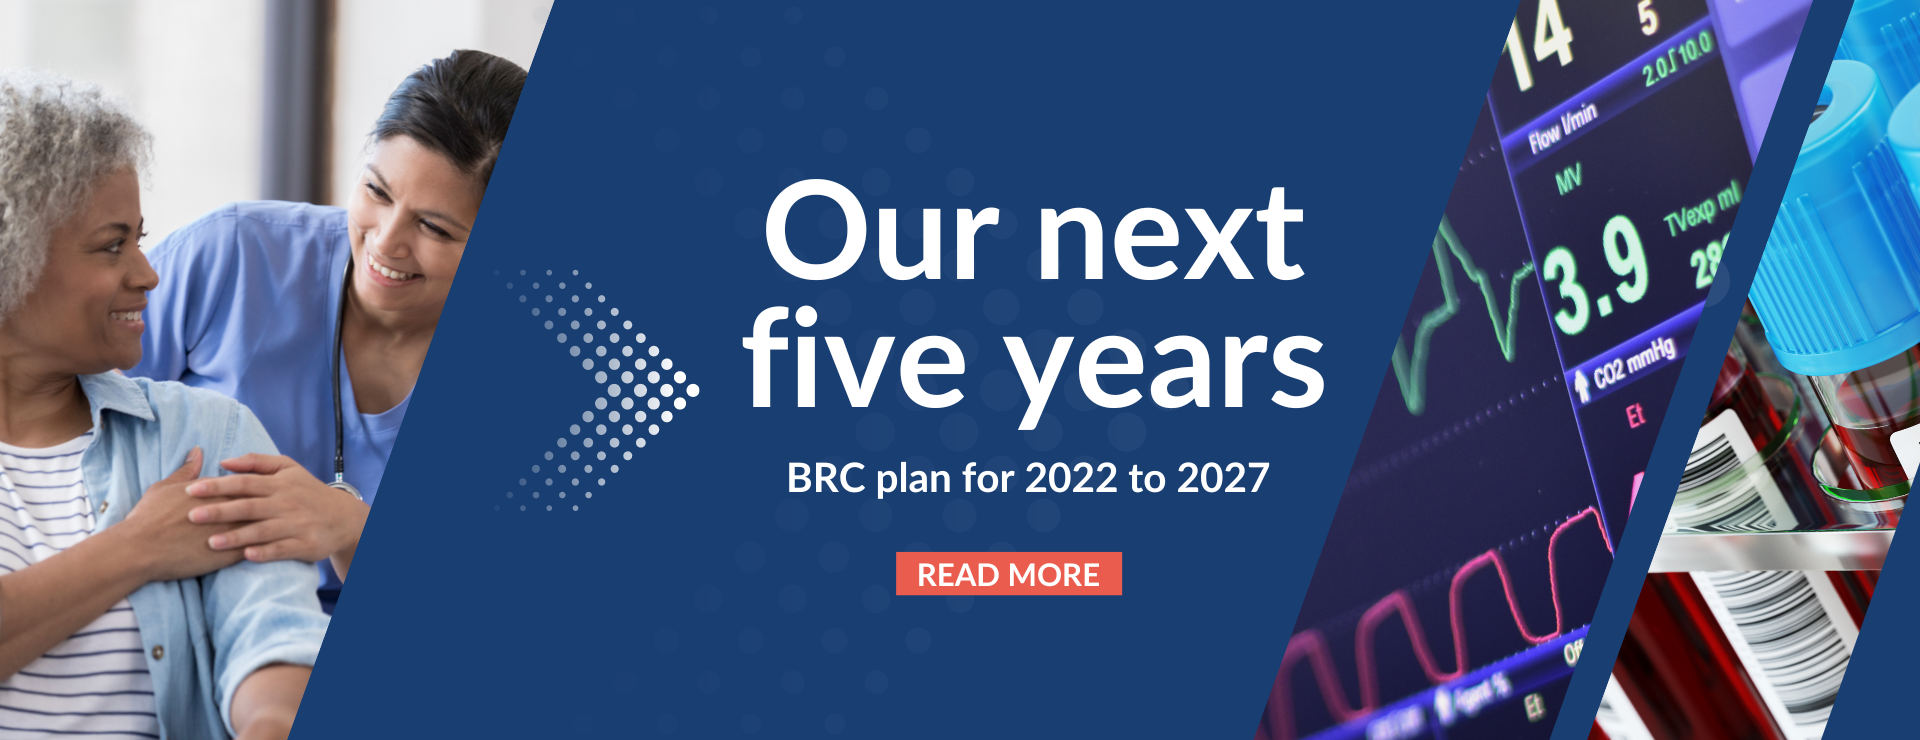 BRC next five years 2022 to 2027